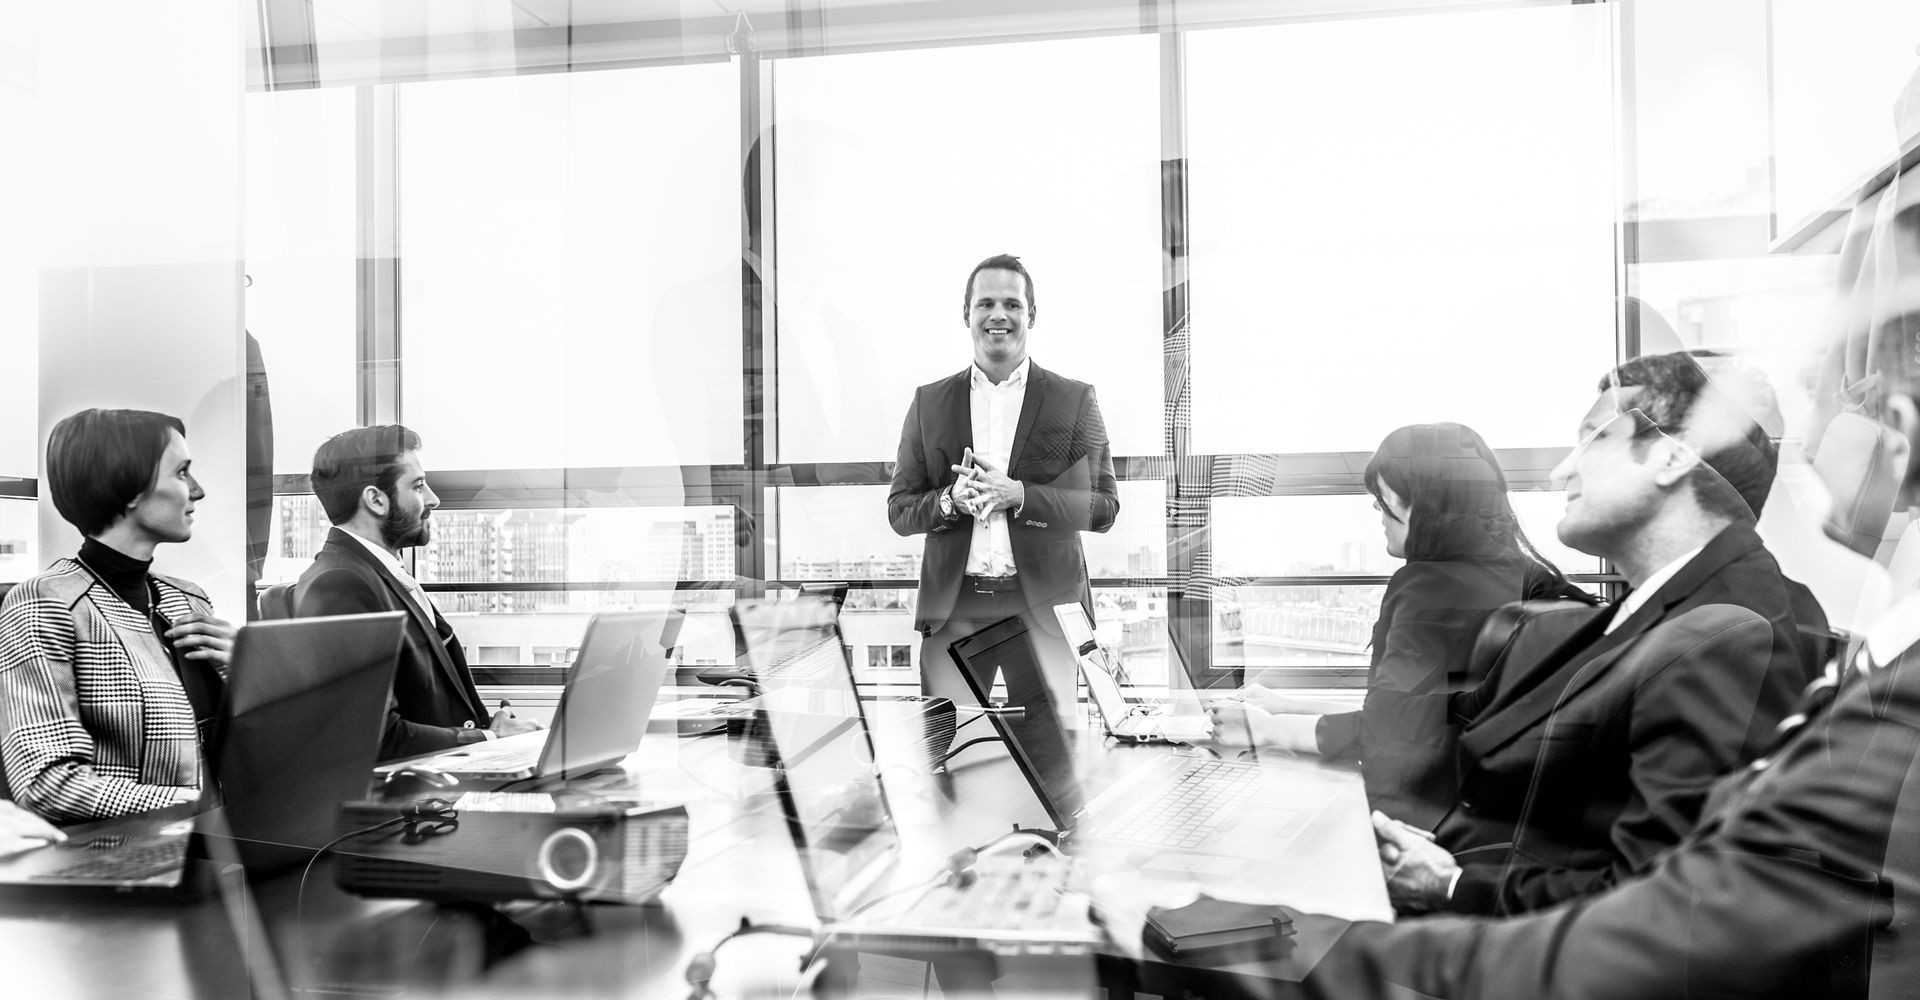 Successful team leader and business owner leading informal in-house business meeting. Businessman working on laptop in foreground. Business and entrepreneurship concept. Blue toned grayscale.